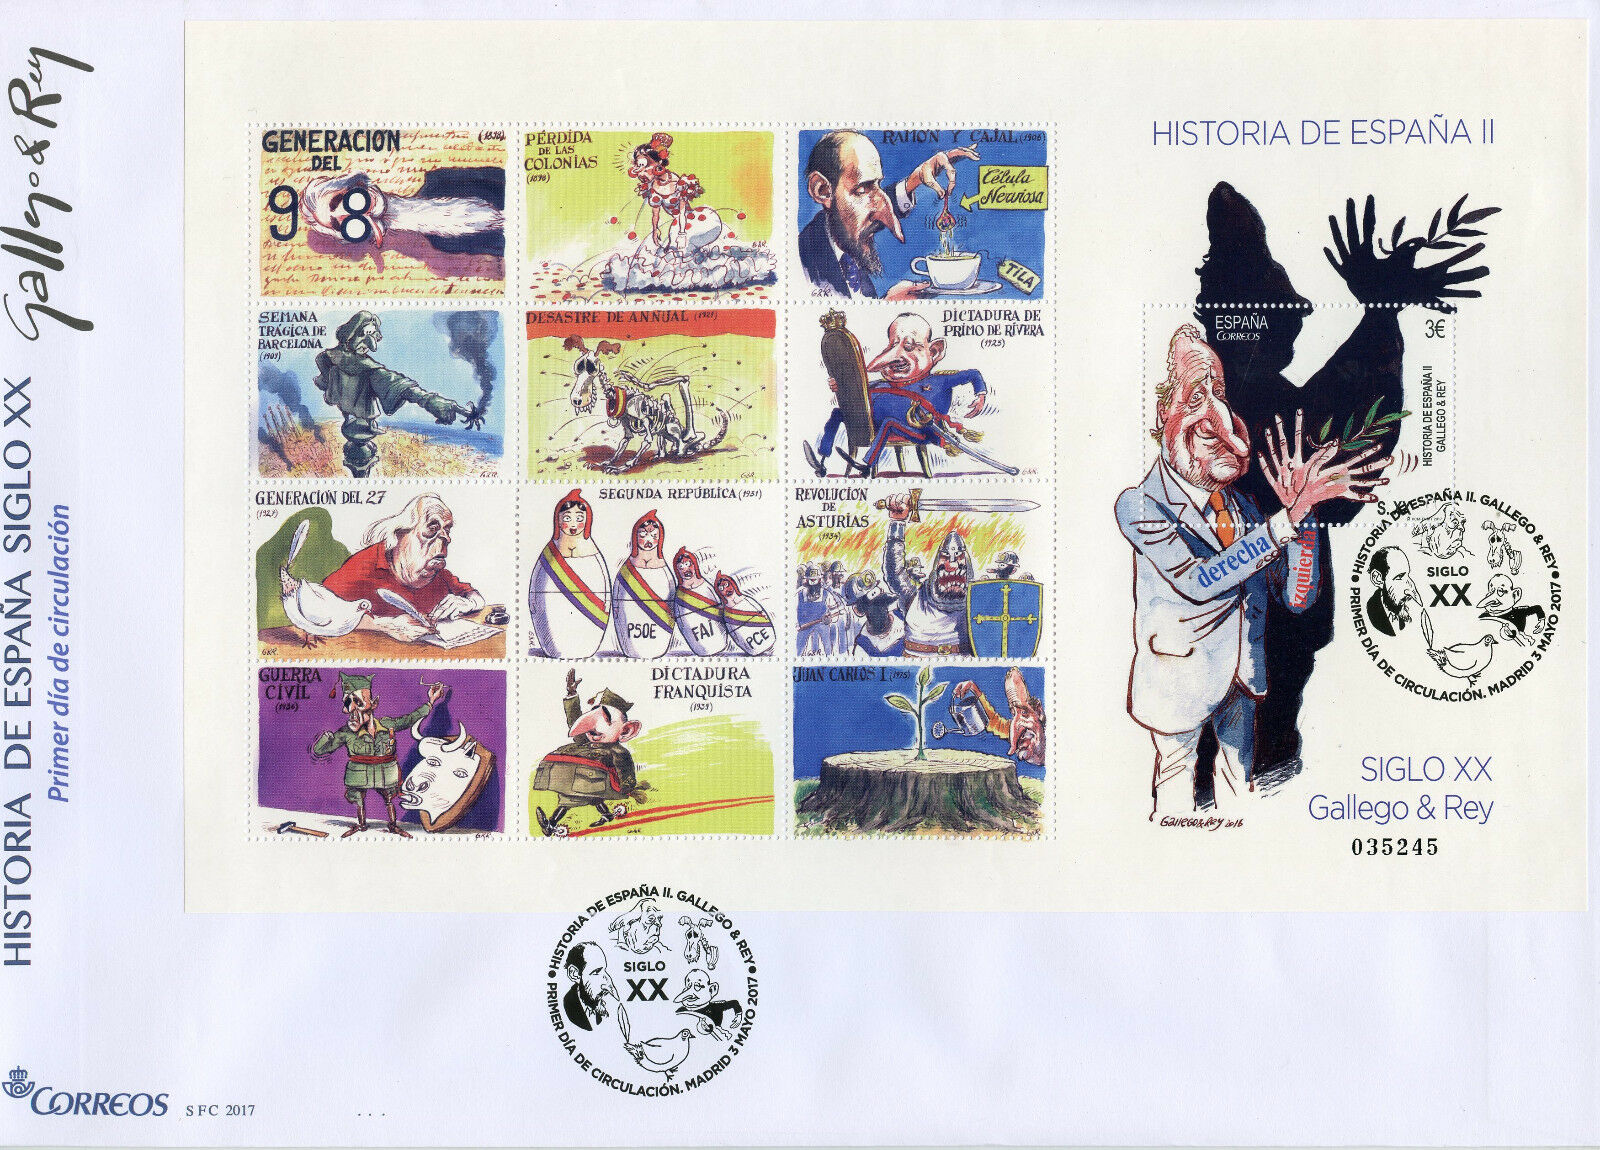 Spain 2017 FDC History of Spain 20th Cent Gallego & Rey 1v M/S Cover Stamps